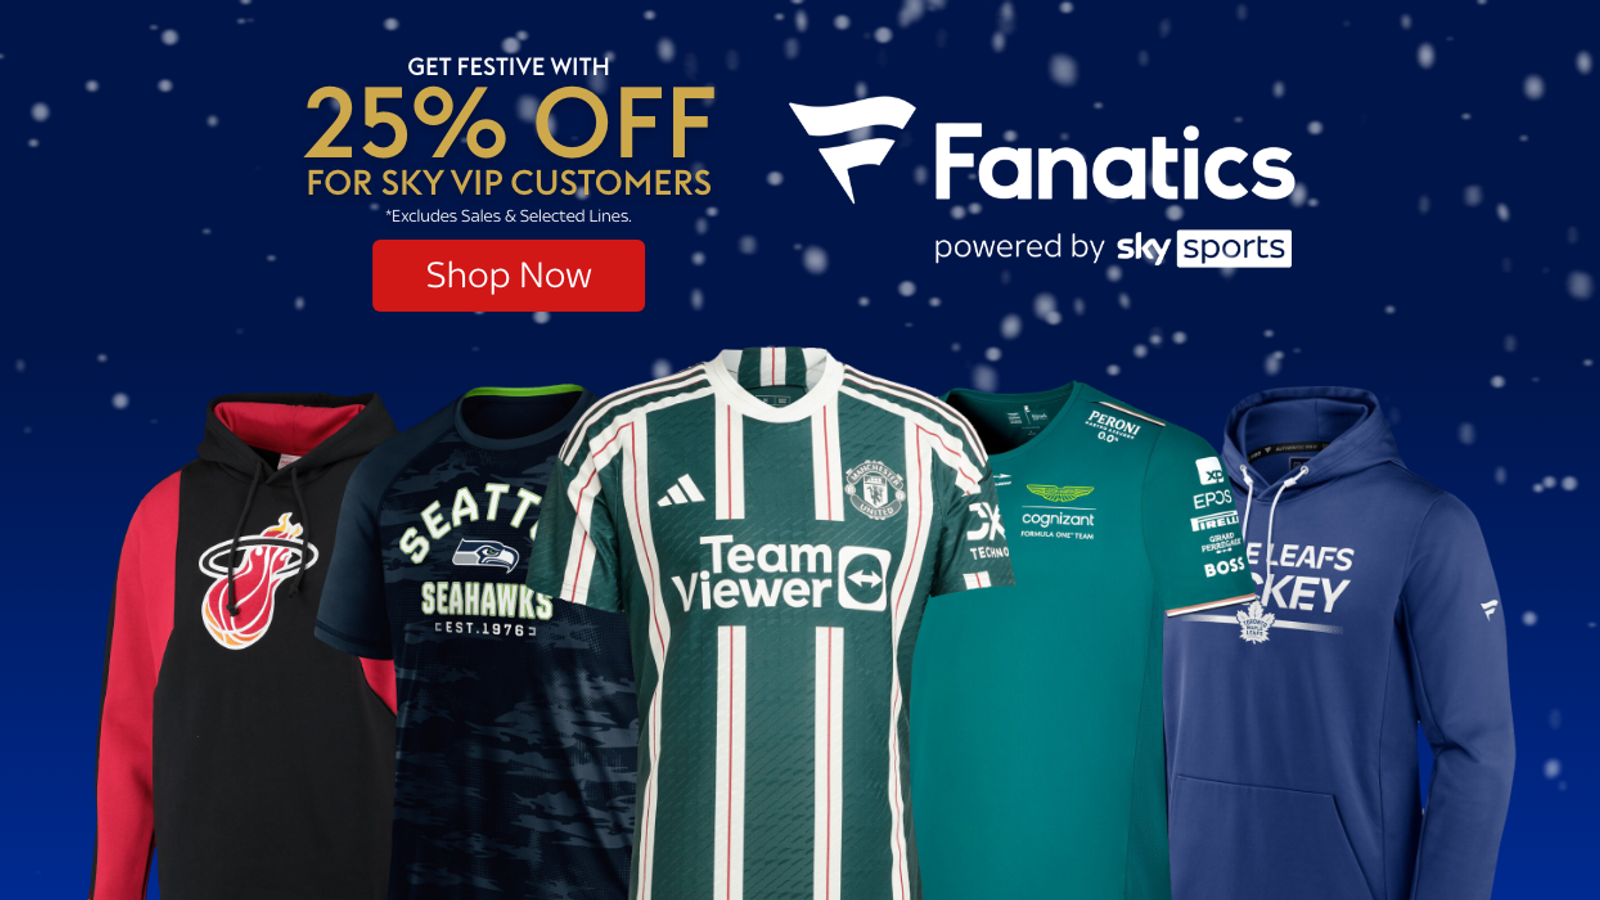 Sky Sports is giving Sky VIP customers 25% off their next apparel order at the Sky Sports Fanatics Shop